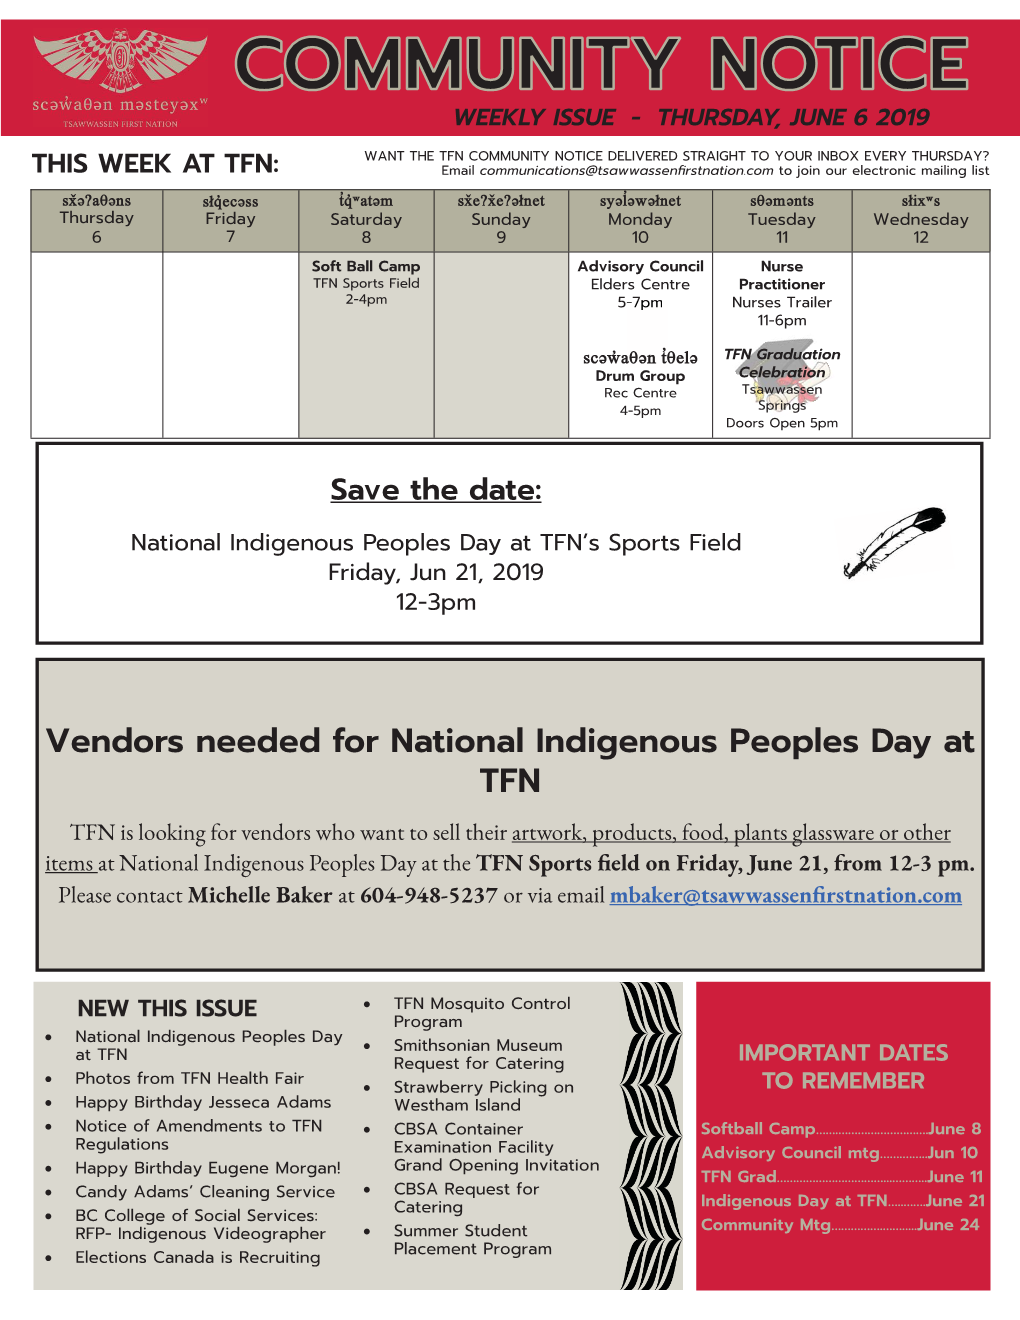 Vendors Needed for National Indigenous Peoples Day at TFN